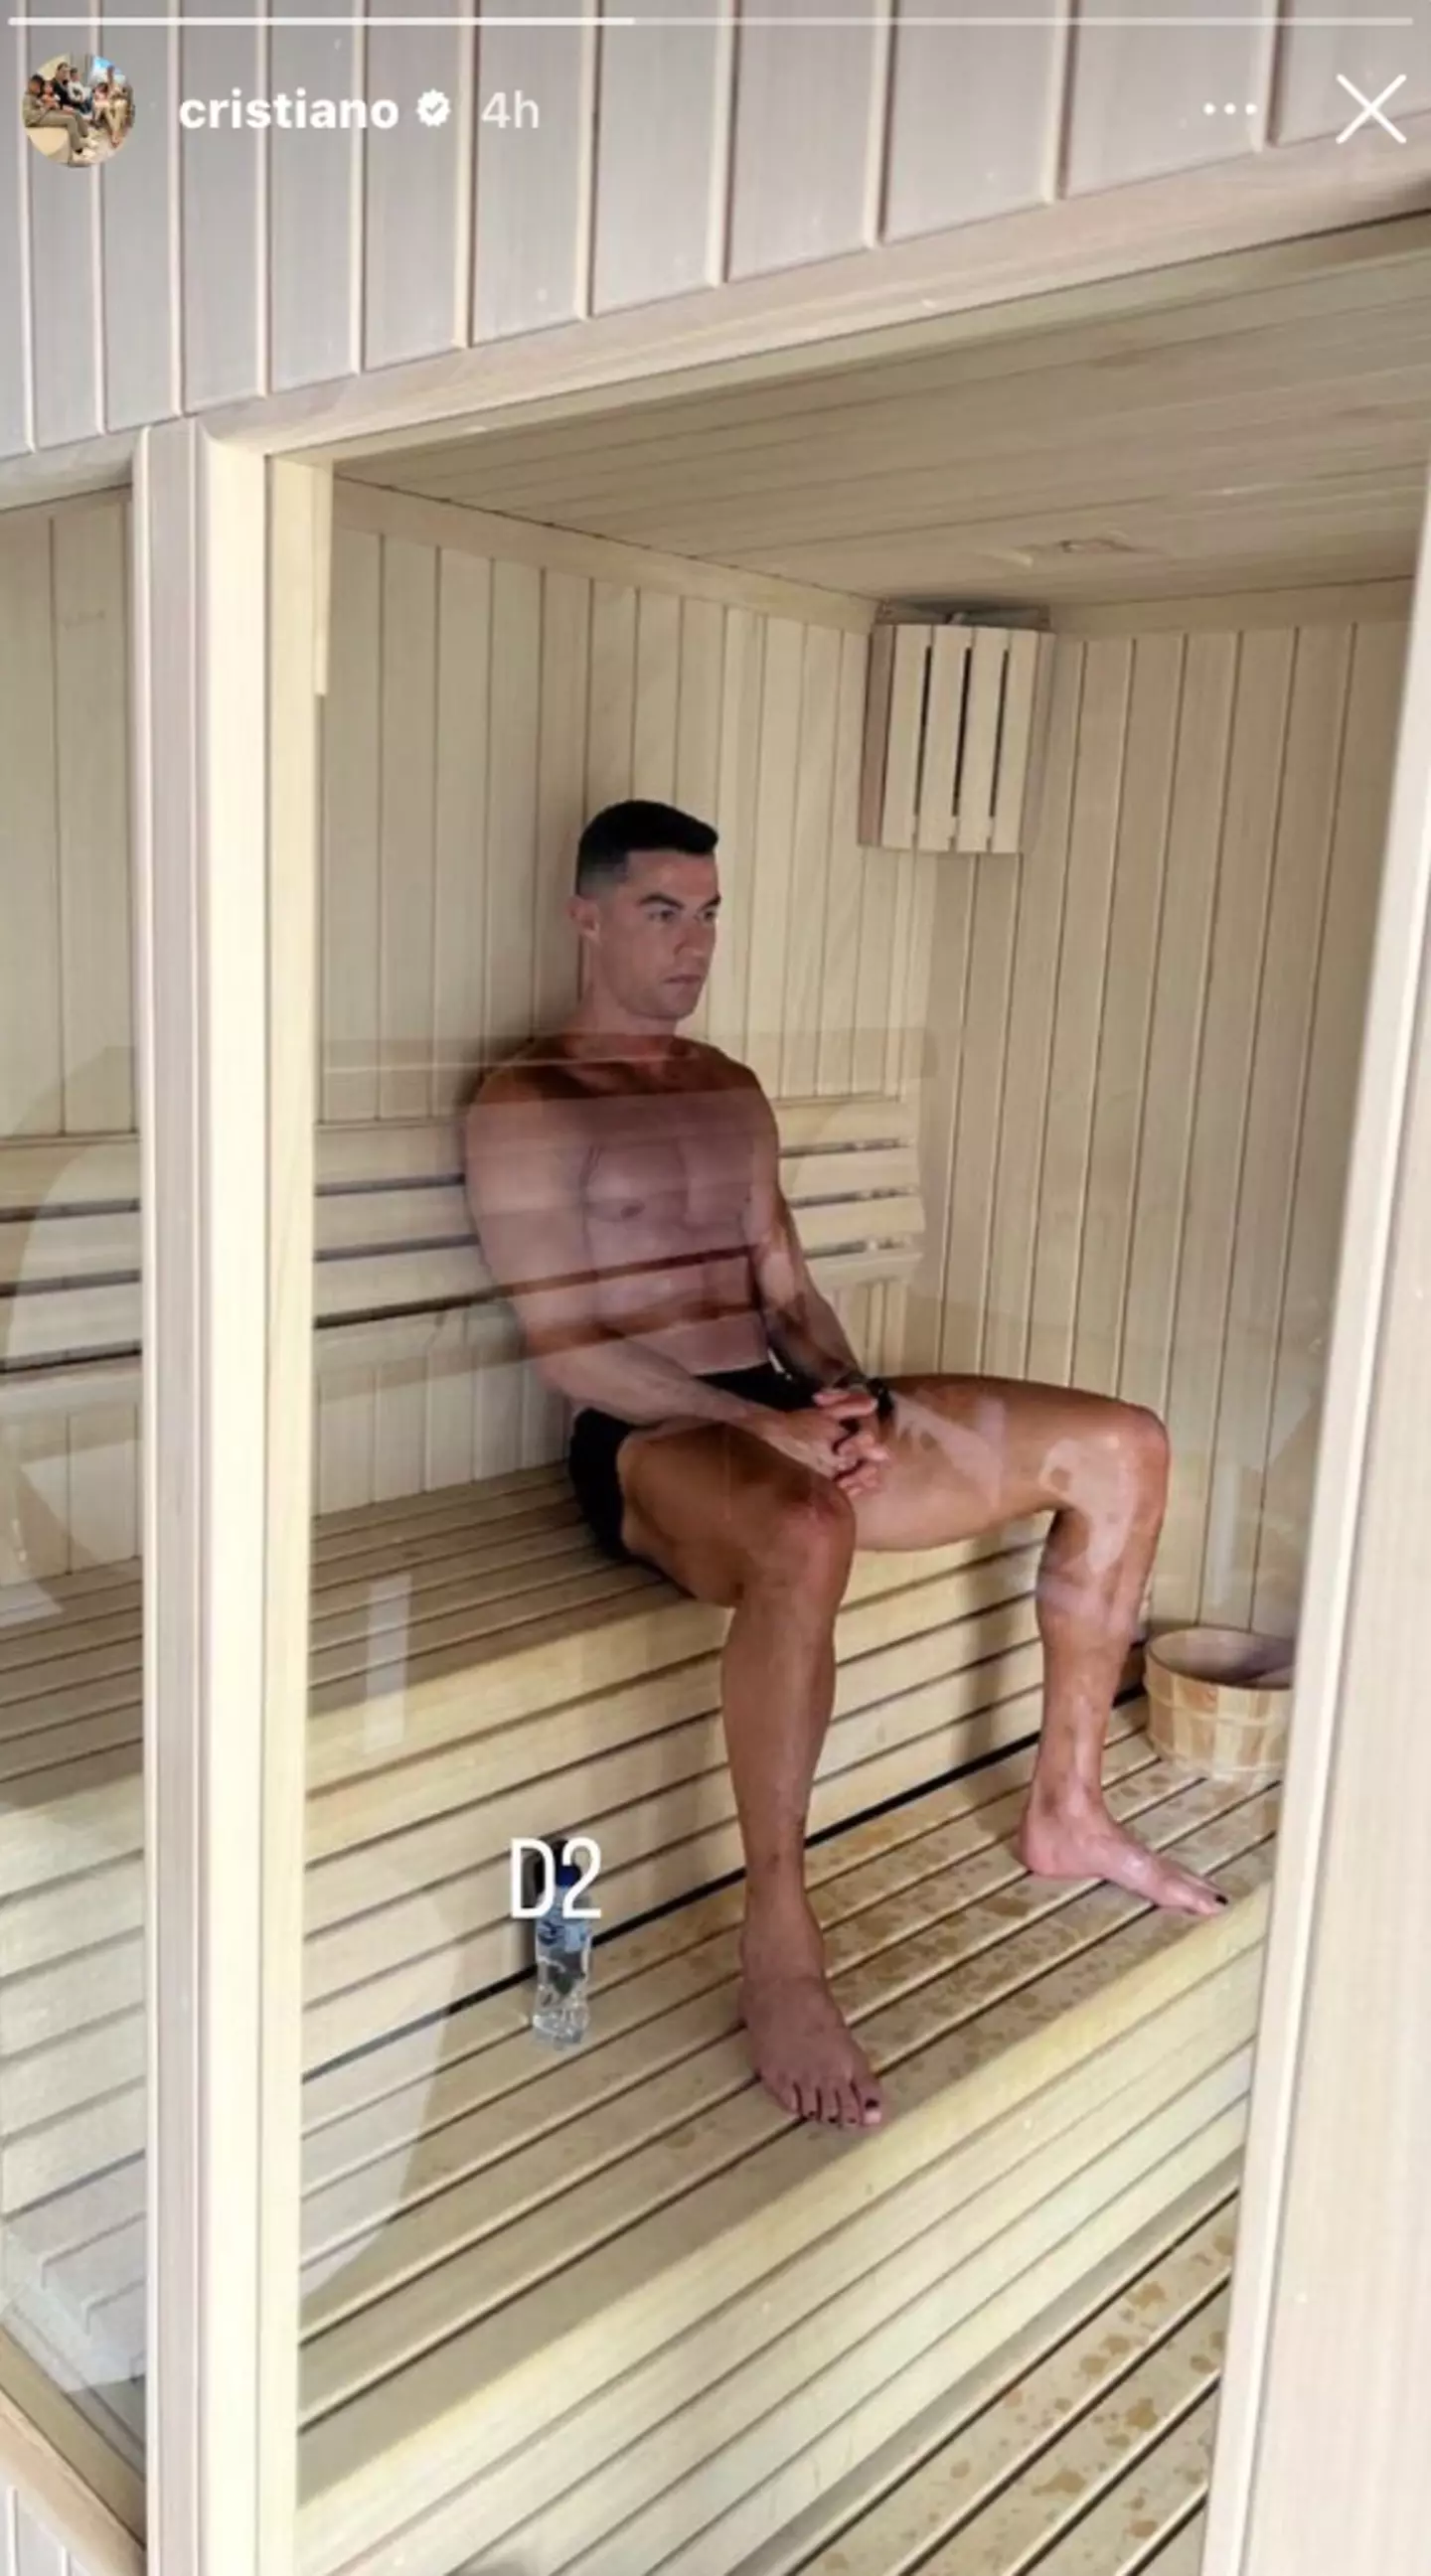 There is a bizarre reason why the likes of Cristiano Ronaldo and various MMA fighters have started painting their toenails black.